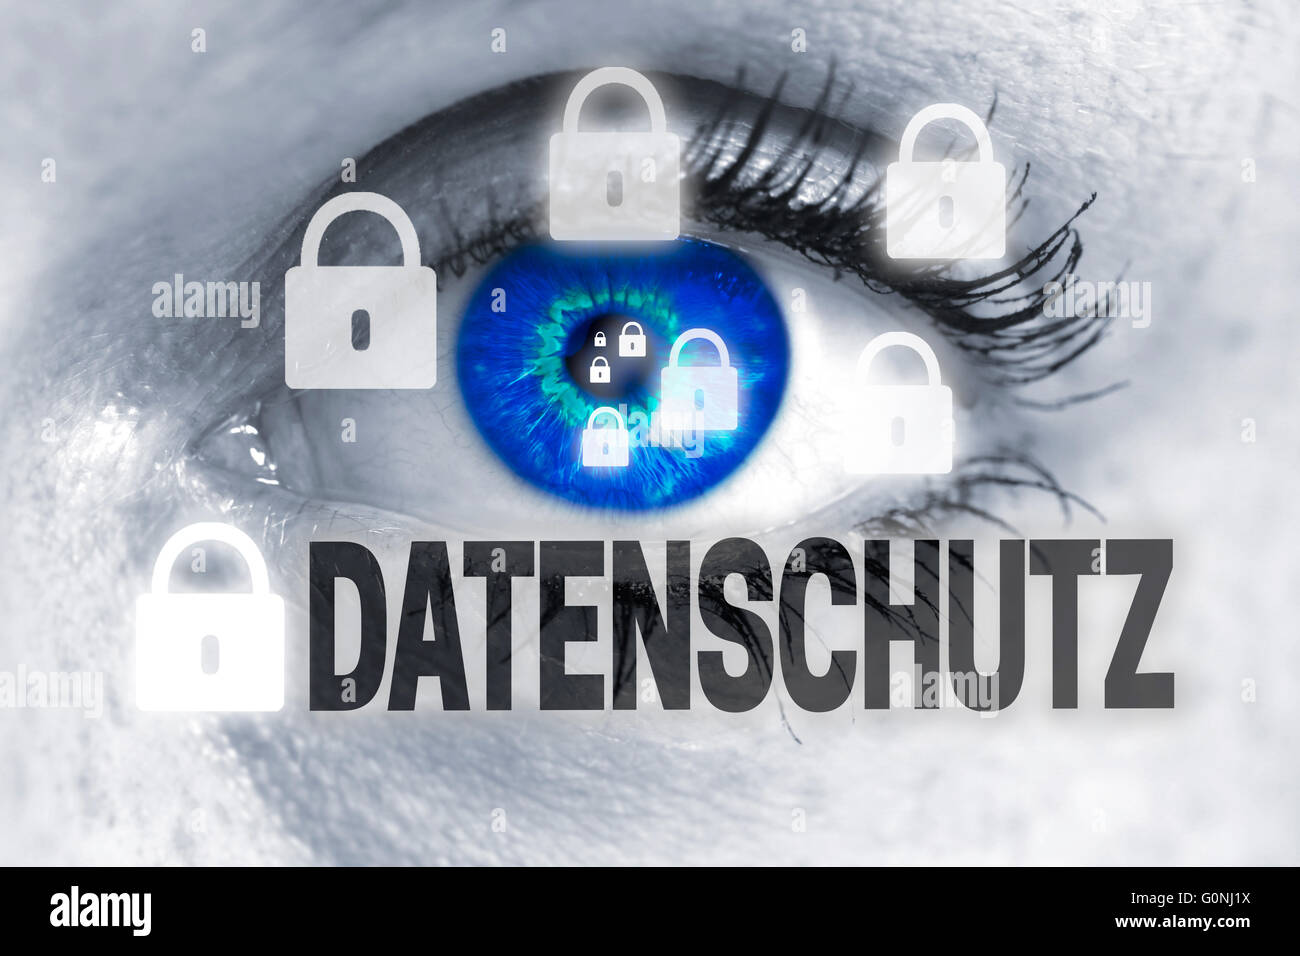 datenschutz (in german data protection) eye looks at viewer concept. Stock Photo